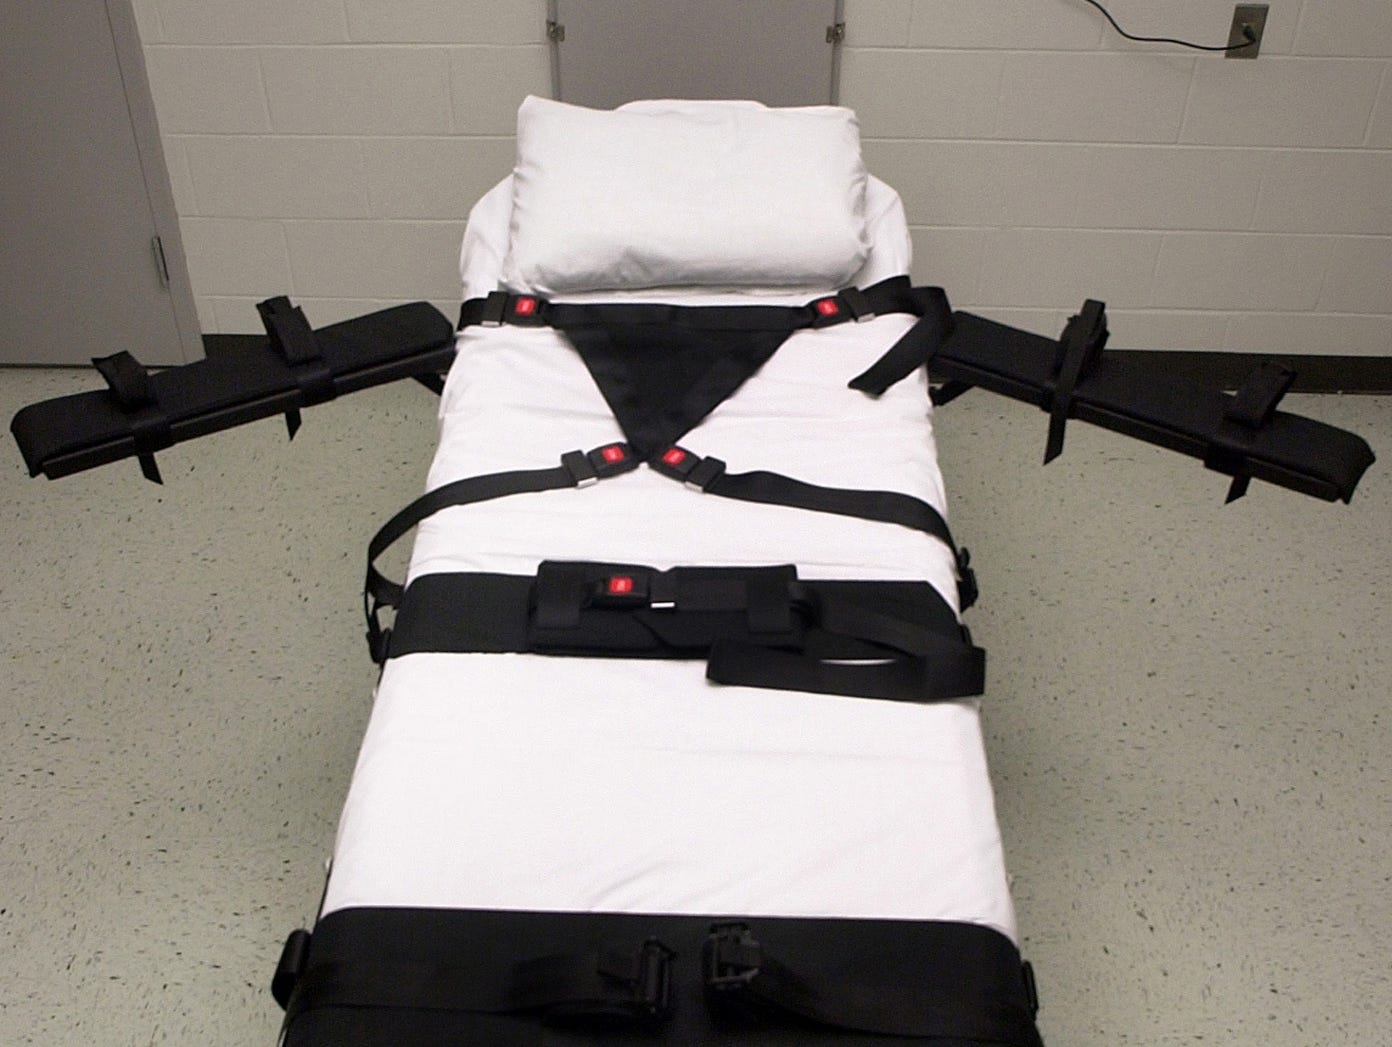 Alabama's lethal injection chamber as shown Oct. 7, 2002, at Holman Correctional Facility in Atmore, Ala.